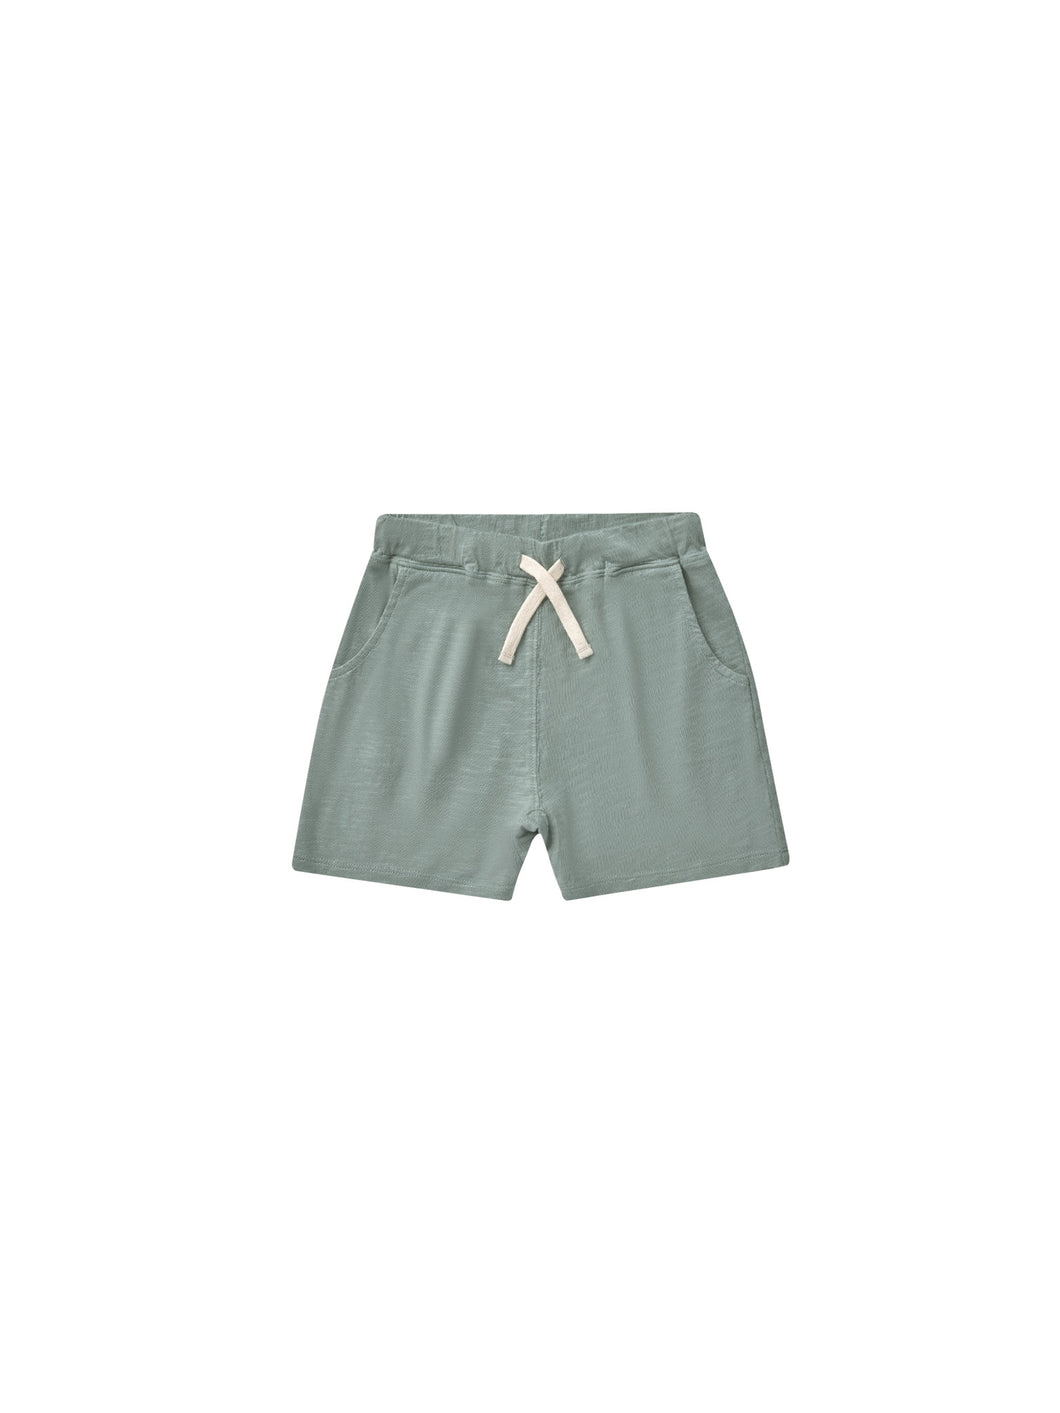 Sam Short is a soft sweat short with a drawstring waistband and this one is featured in an aqua colour. 